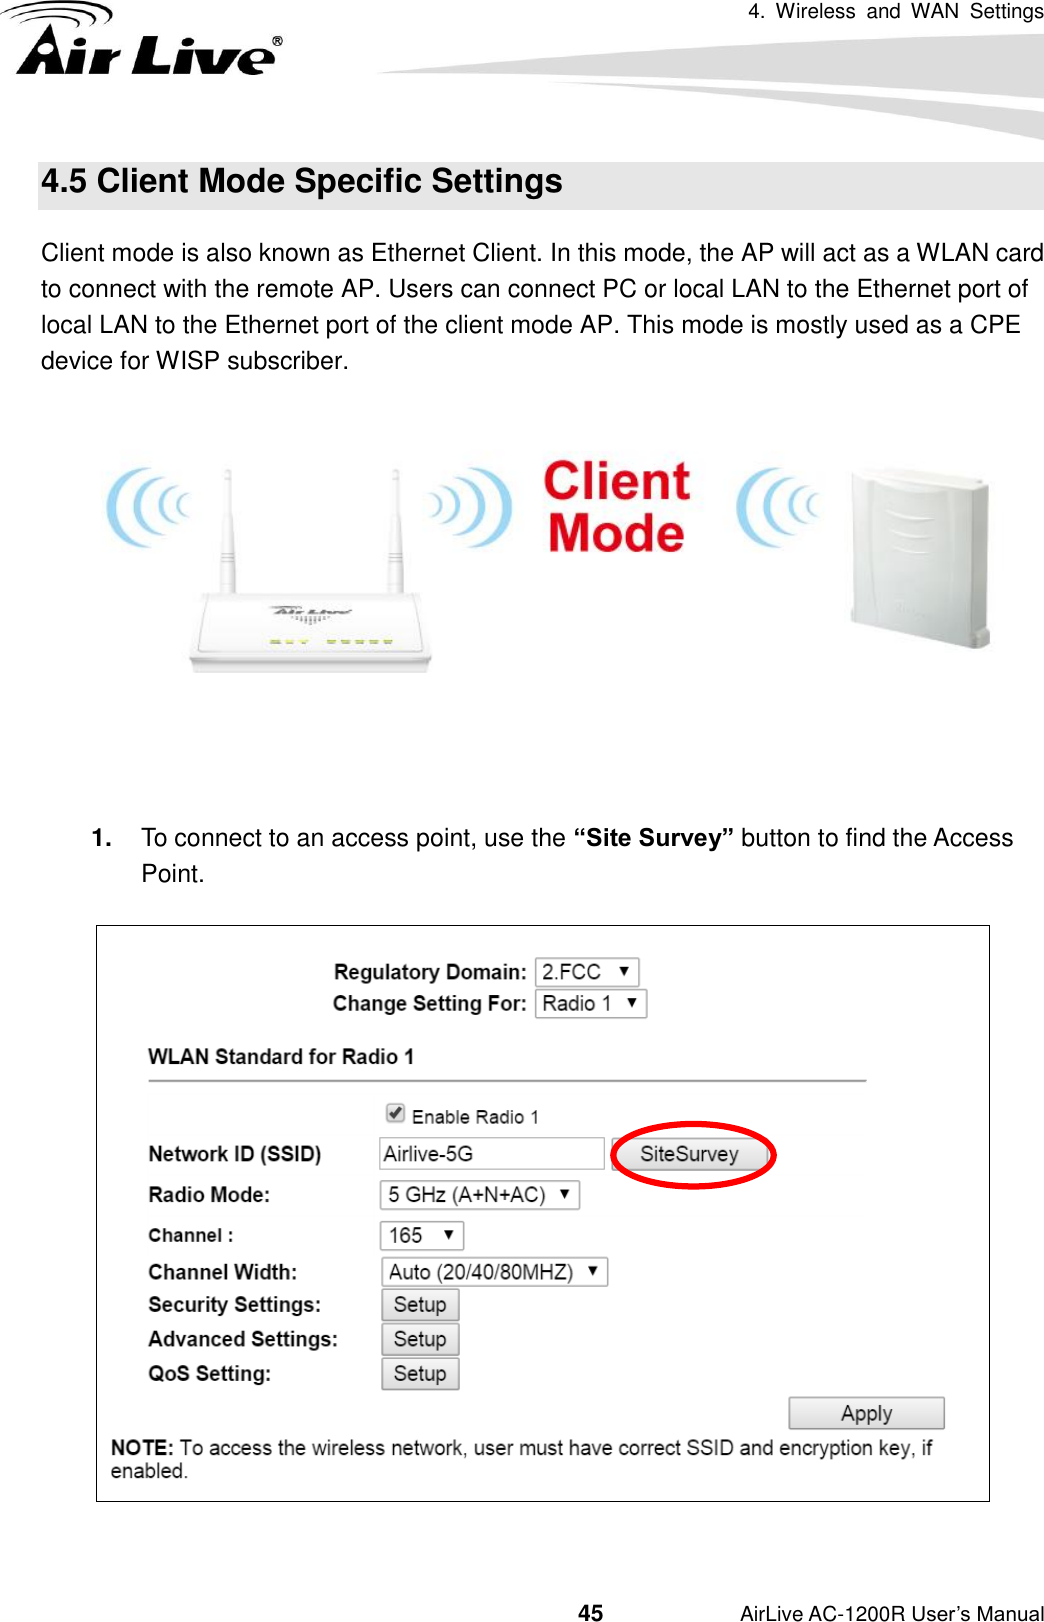 4.  Wireless  and  WAN  Settings                                         45           AirLive AC-1200R User’s Manual 4.5 Client Mode Specific Settings Client mode is also known as Ethernet Client. In this mode, the AP will act as a WLAN card to connect with the remote AP. Users can connect PC or local LAN to the Ethernet port of local LAN to the Ethernet port of the client mode AP. This mode is mostly used as a CPE device for WISP subscriber.   1. To connect to an access point, use the “Site Survey” button to find the Access Point.     